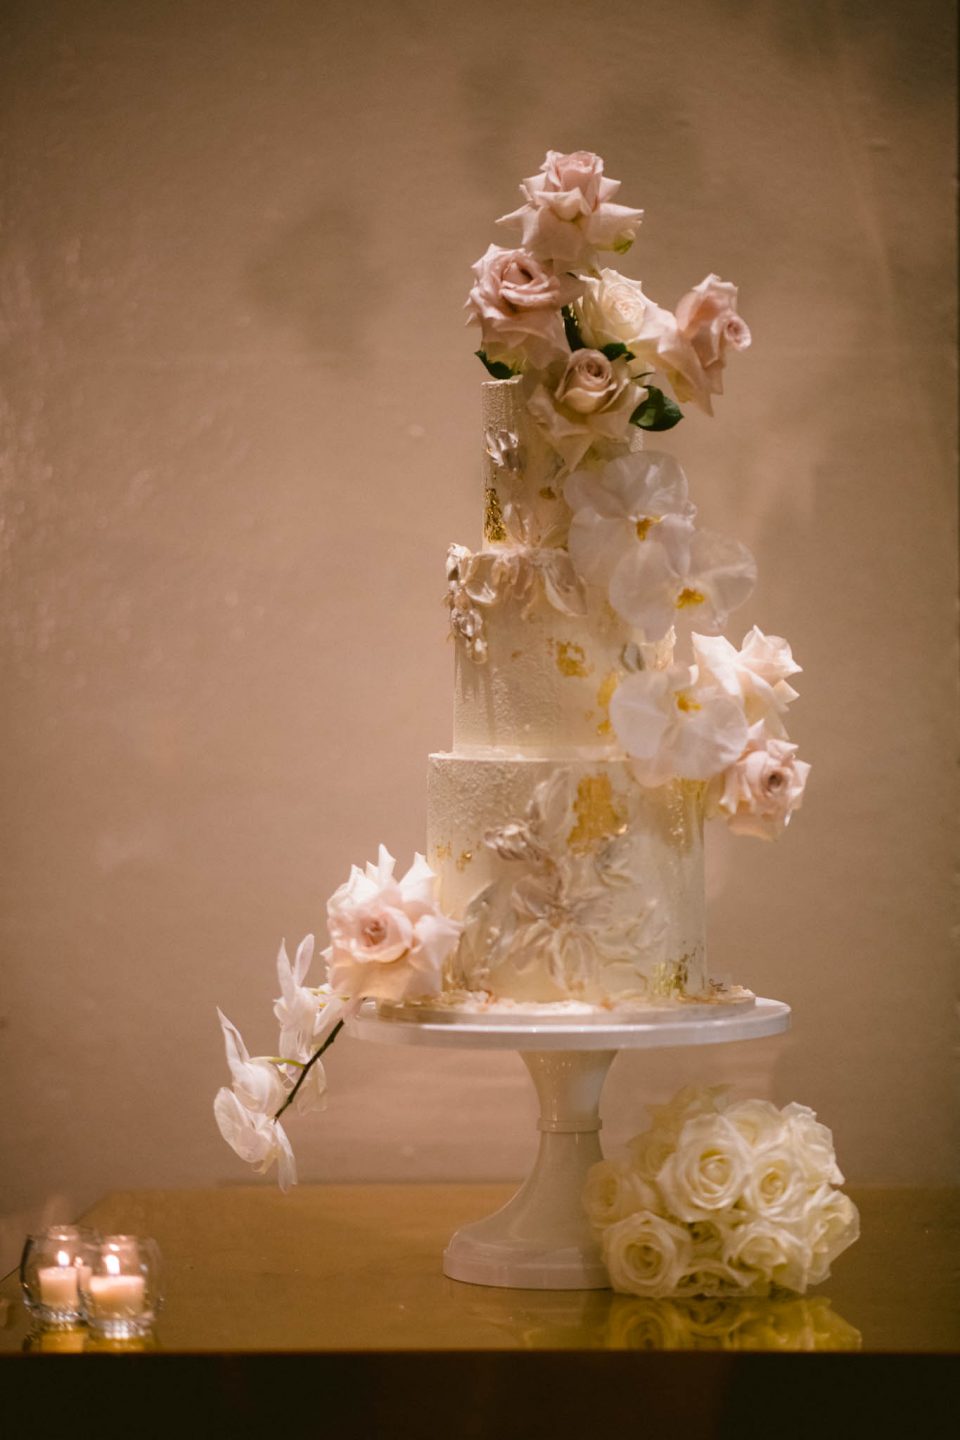 cake decorated in fresh pink and white roses on wedding day